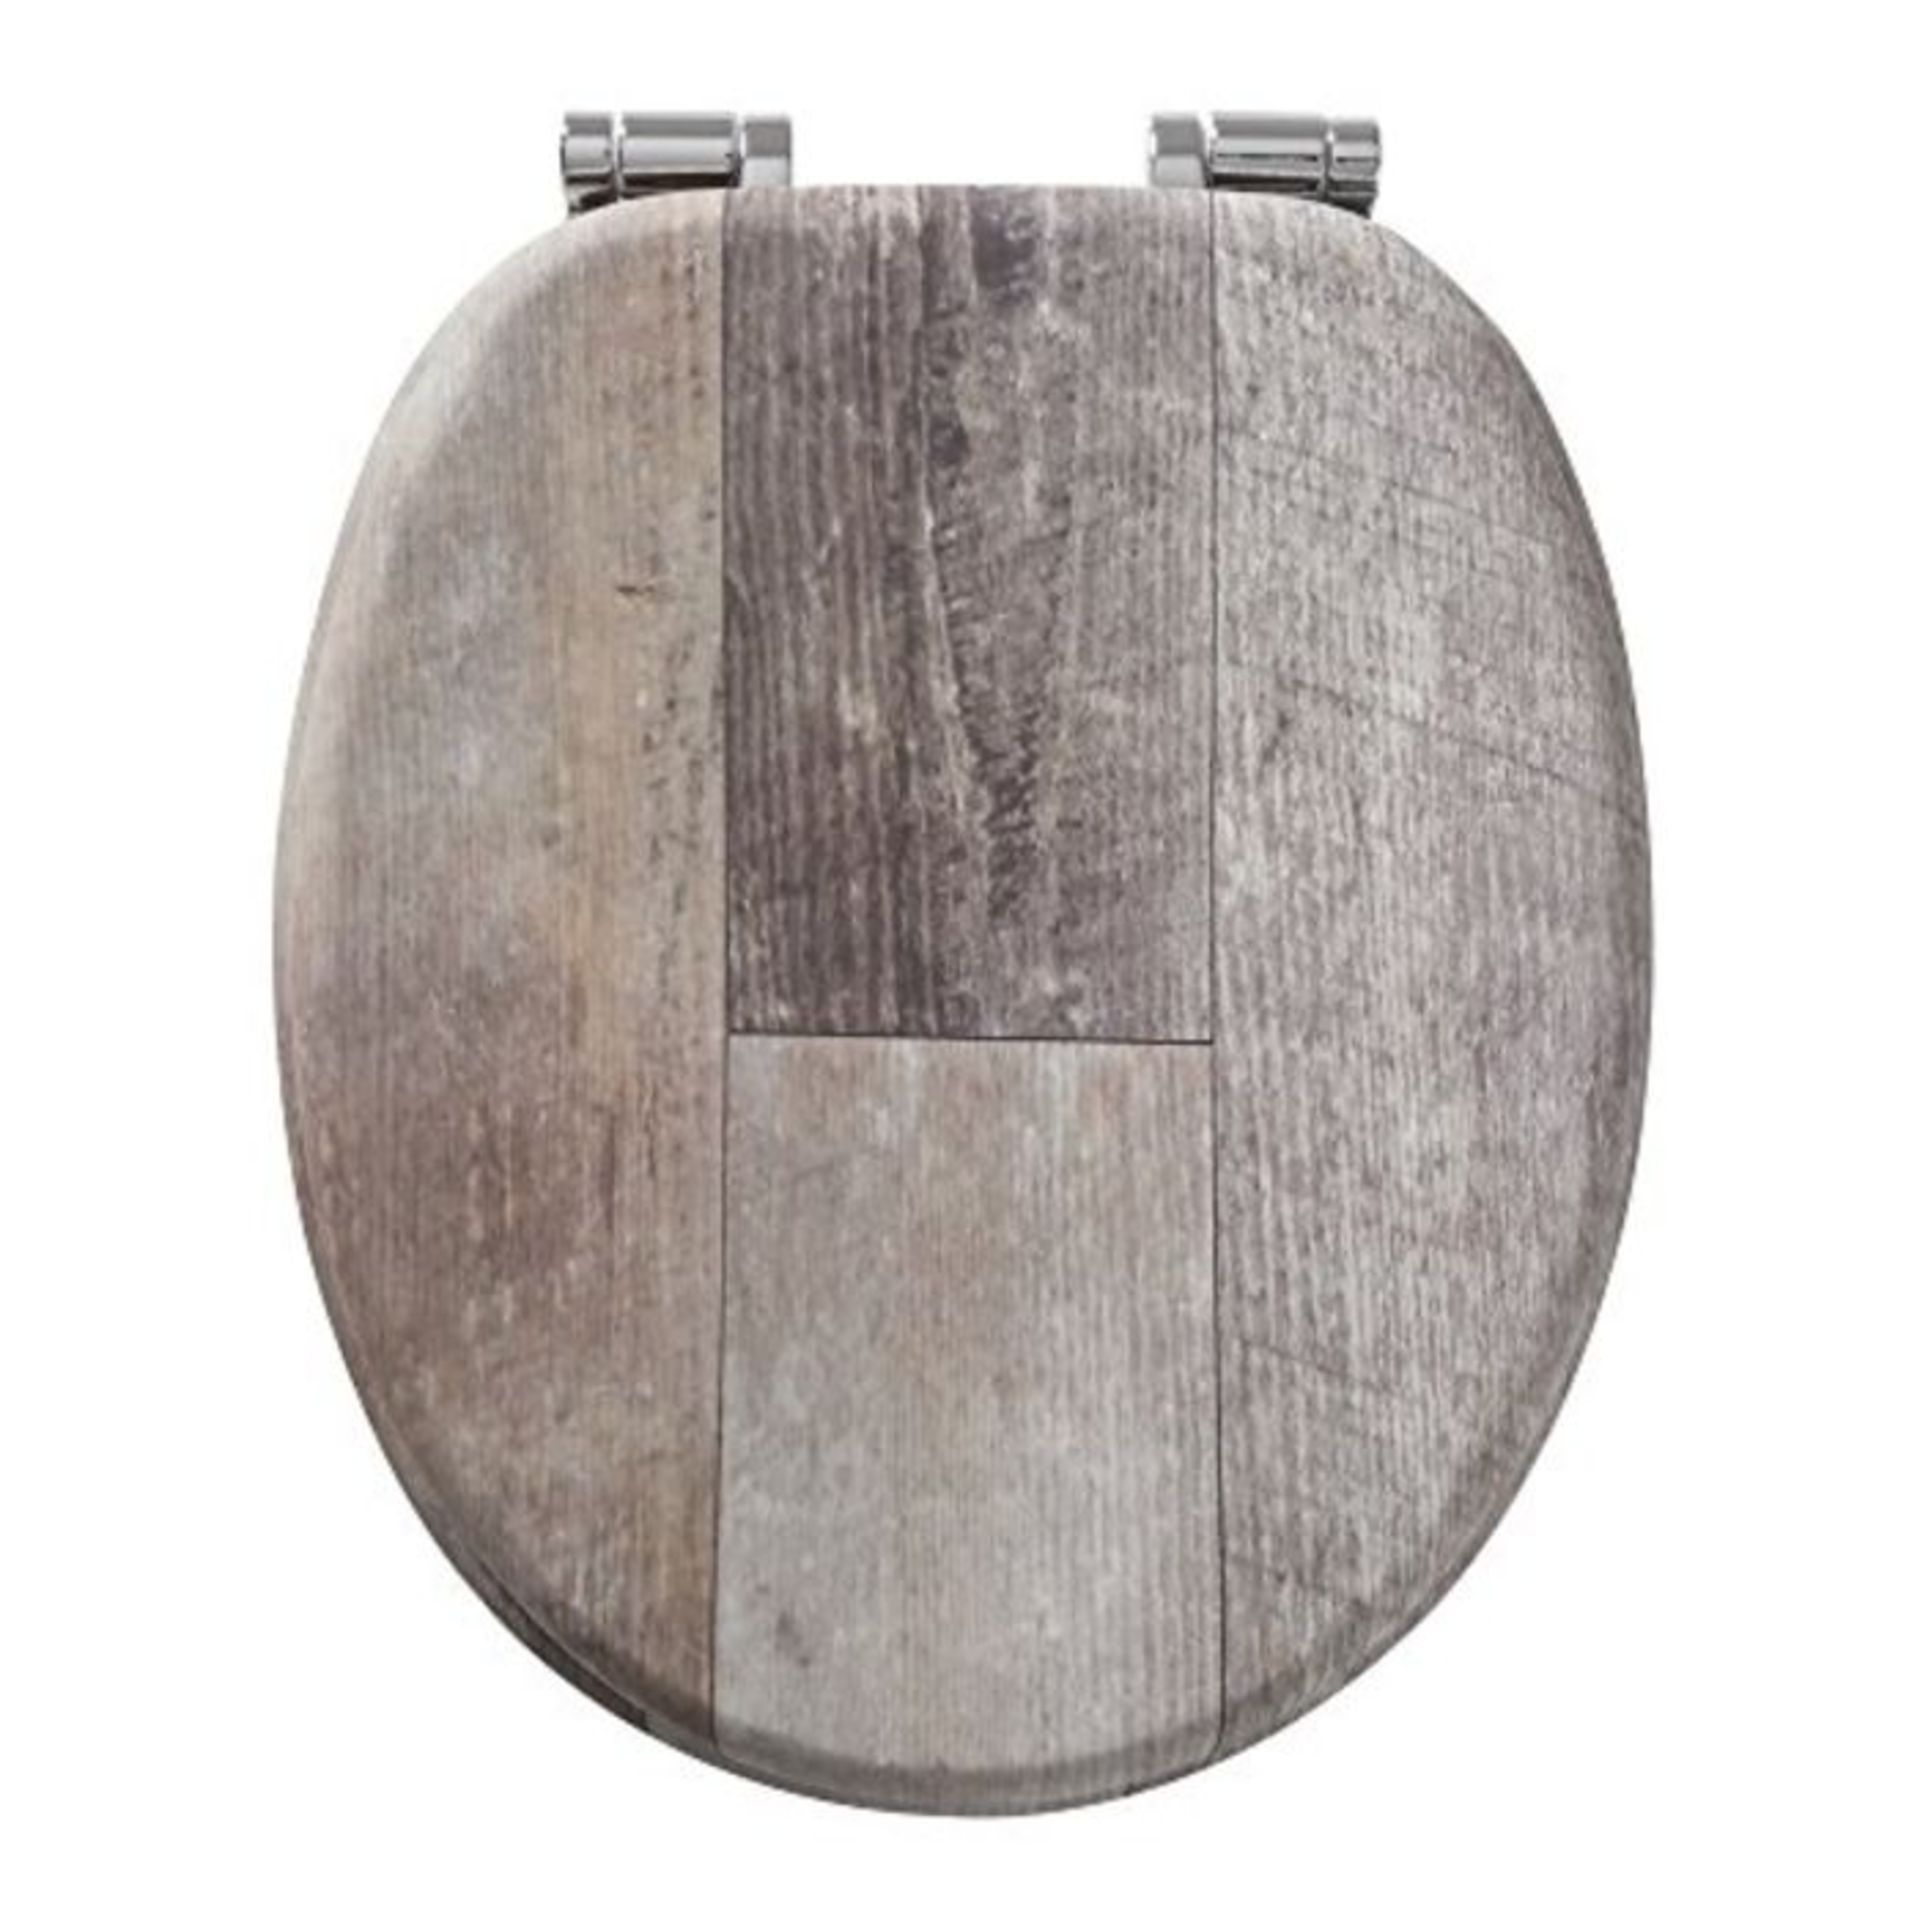 [CRACKED] Tiger Old Wood Toilet Seat, Stainless Steel, MDF, Rubber, Brown, 37.7 x 5.5